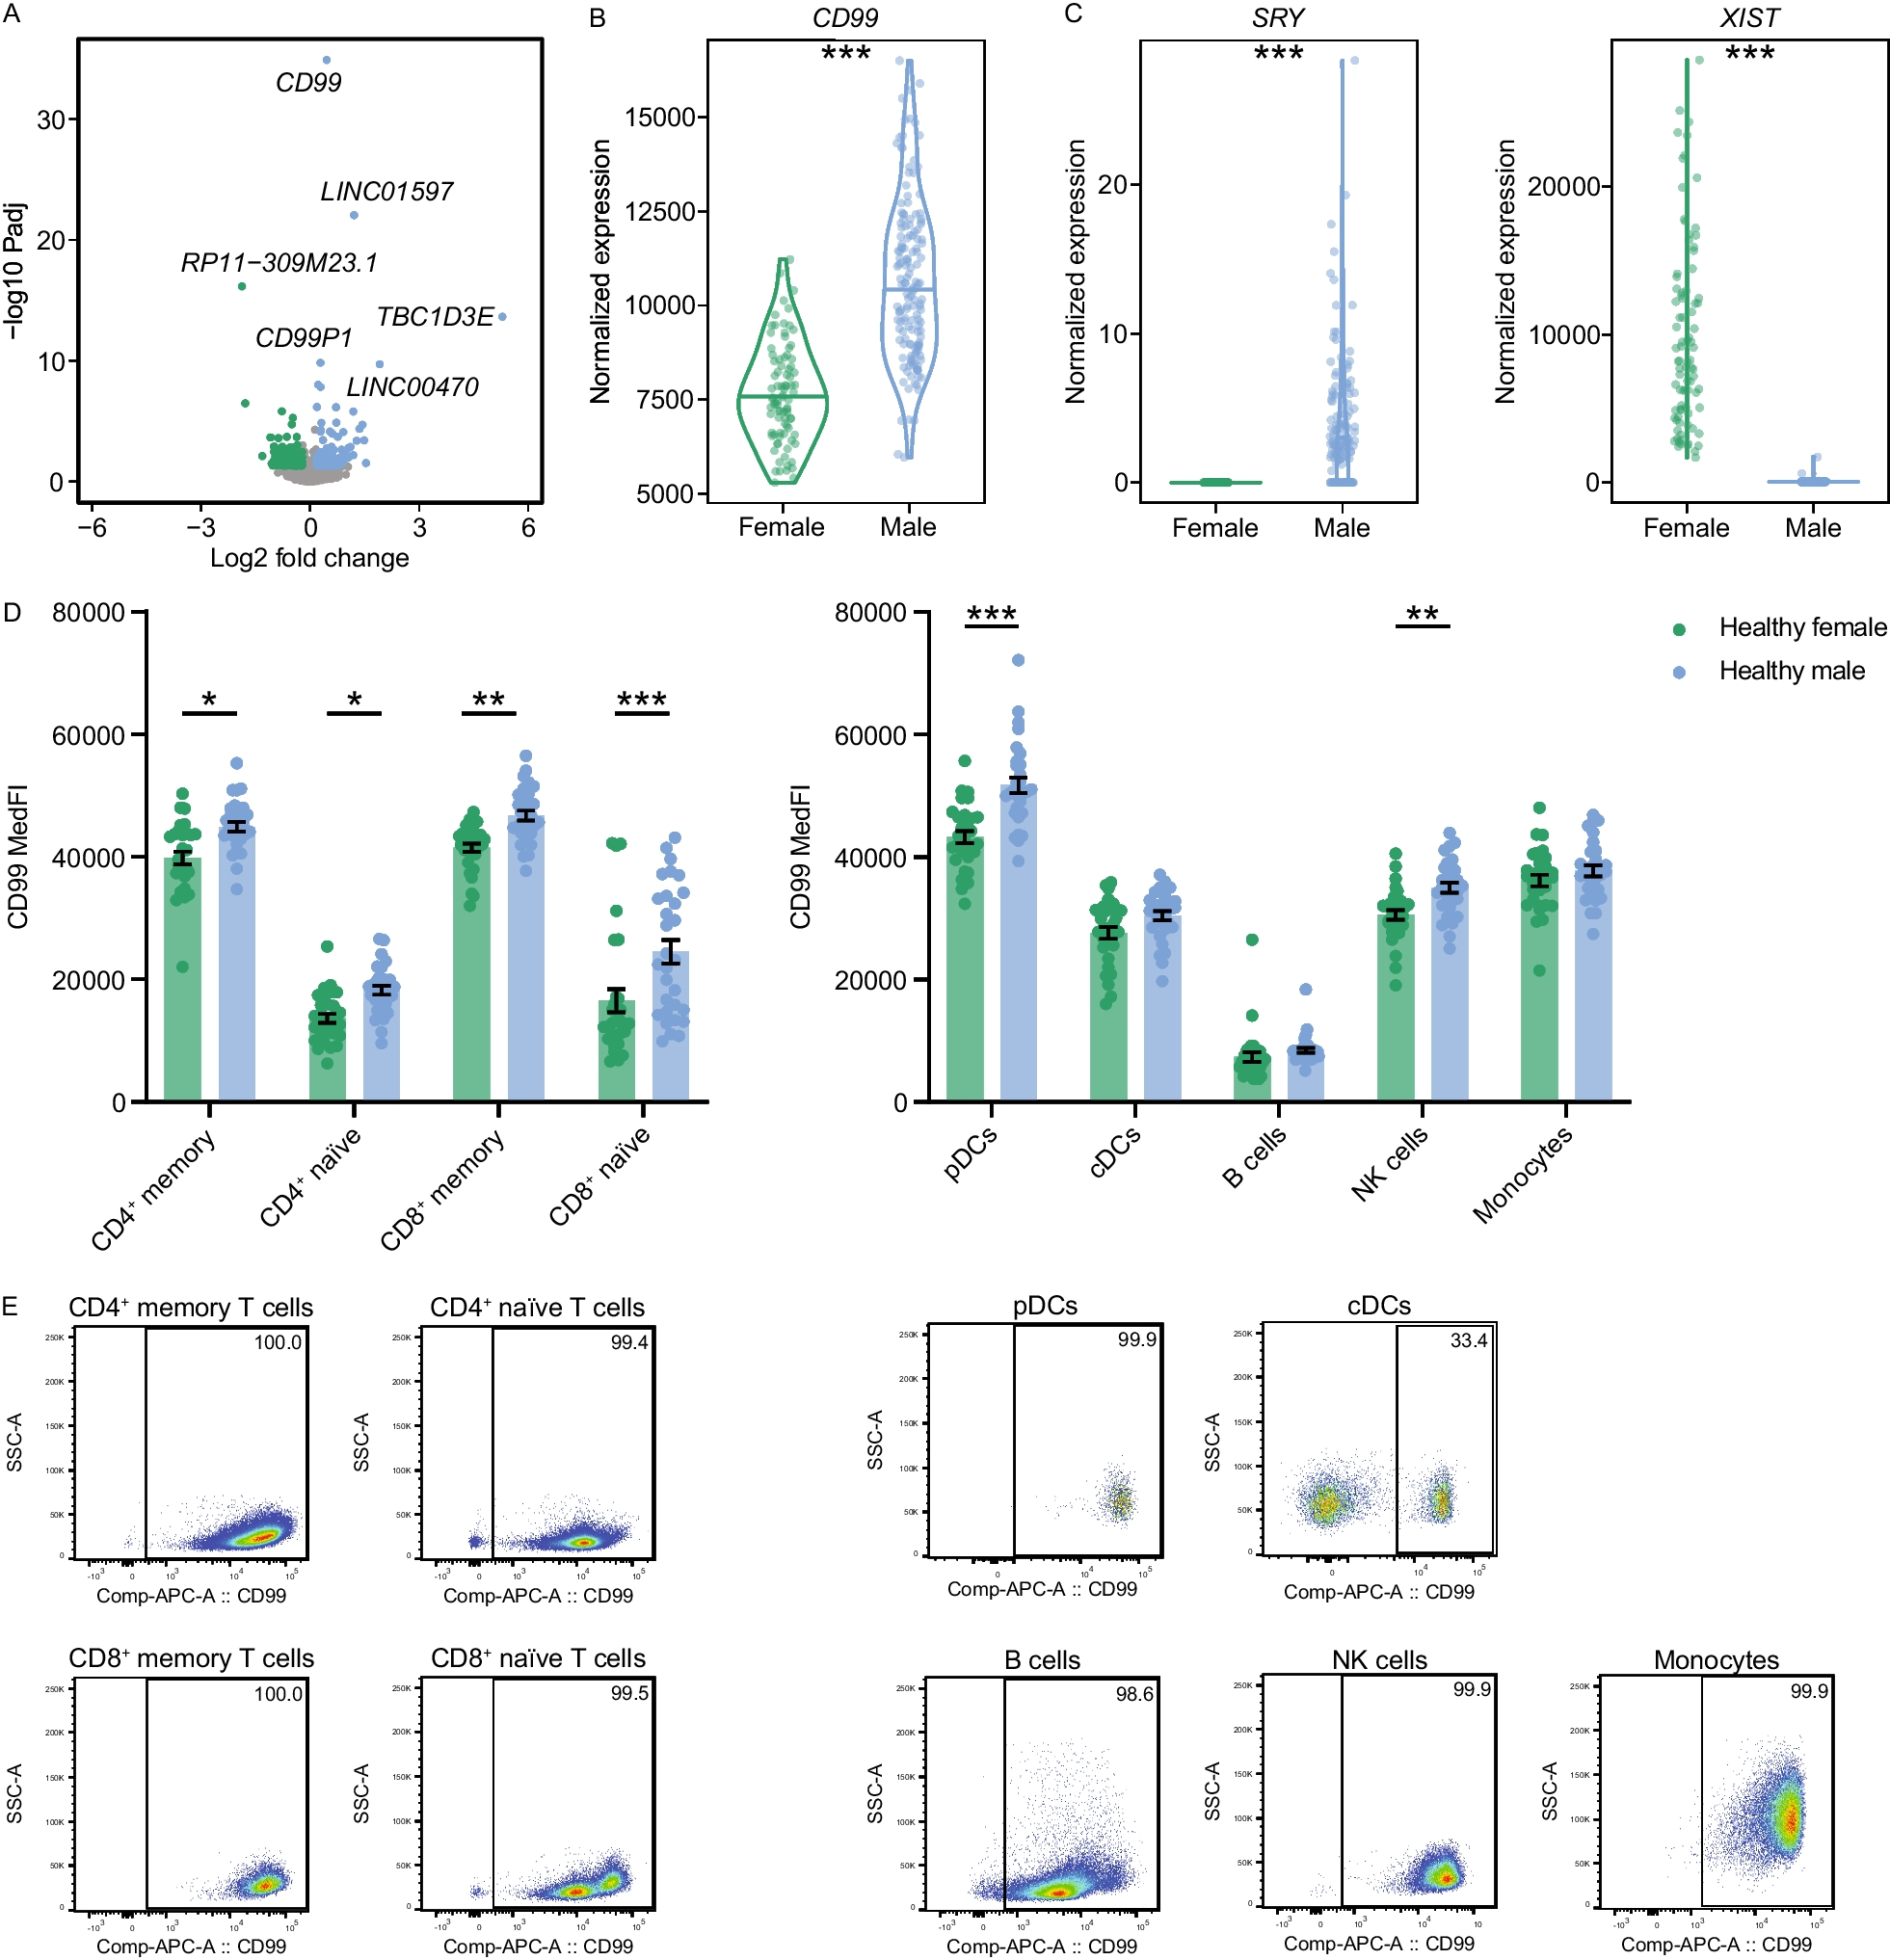 Sex- and species-specific contribution of CD99 to T cell costimulation during multiple sclerosis